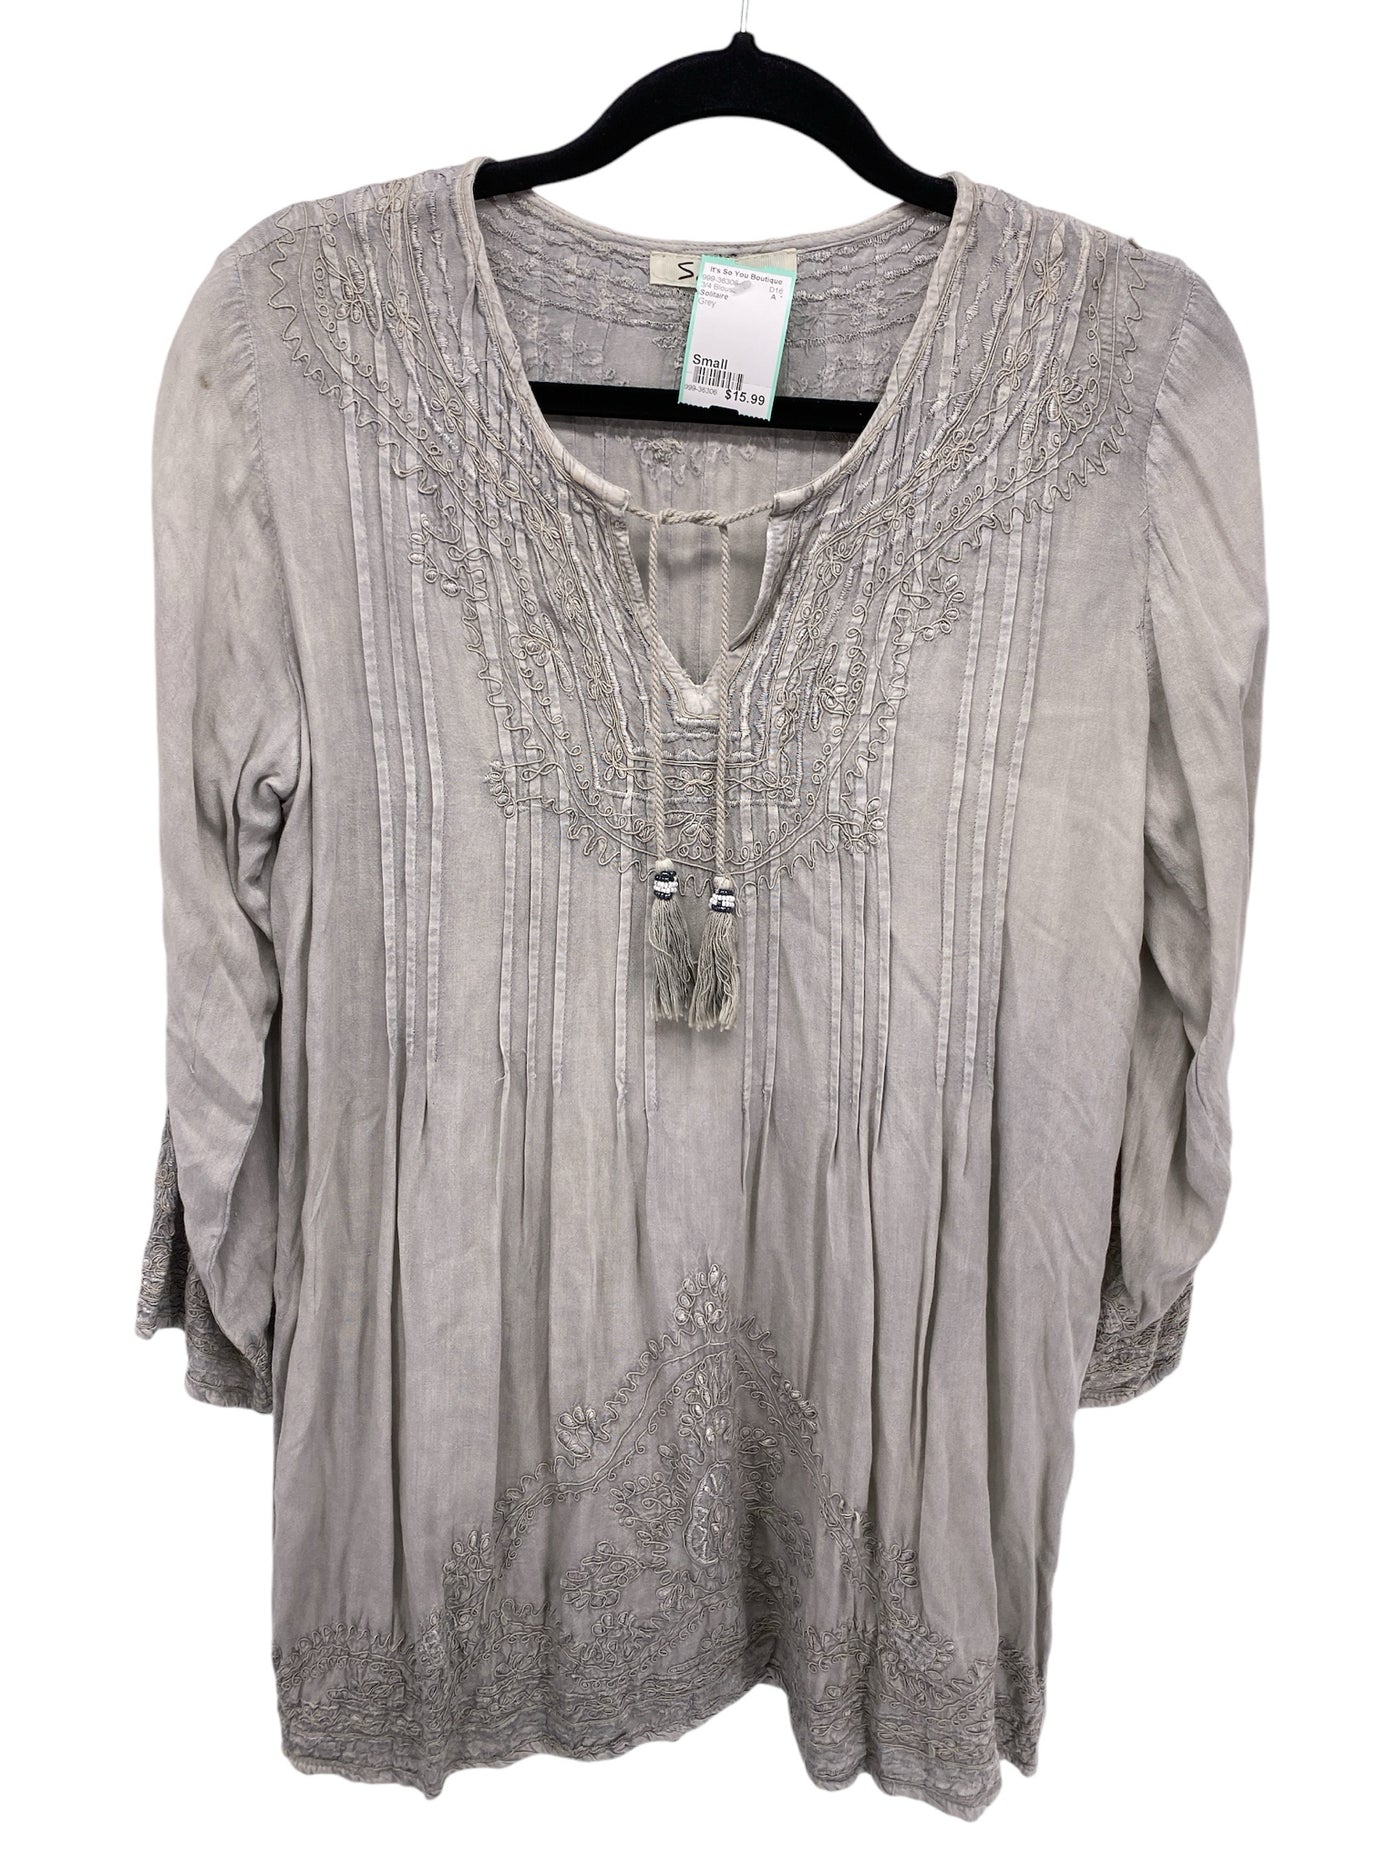 Solitaire Misses Size Small Grey 3/4 Blouse